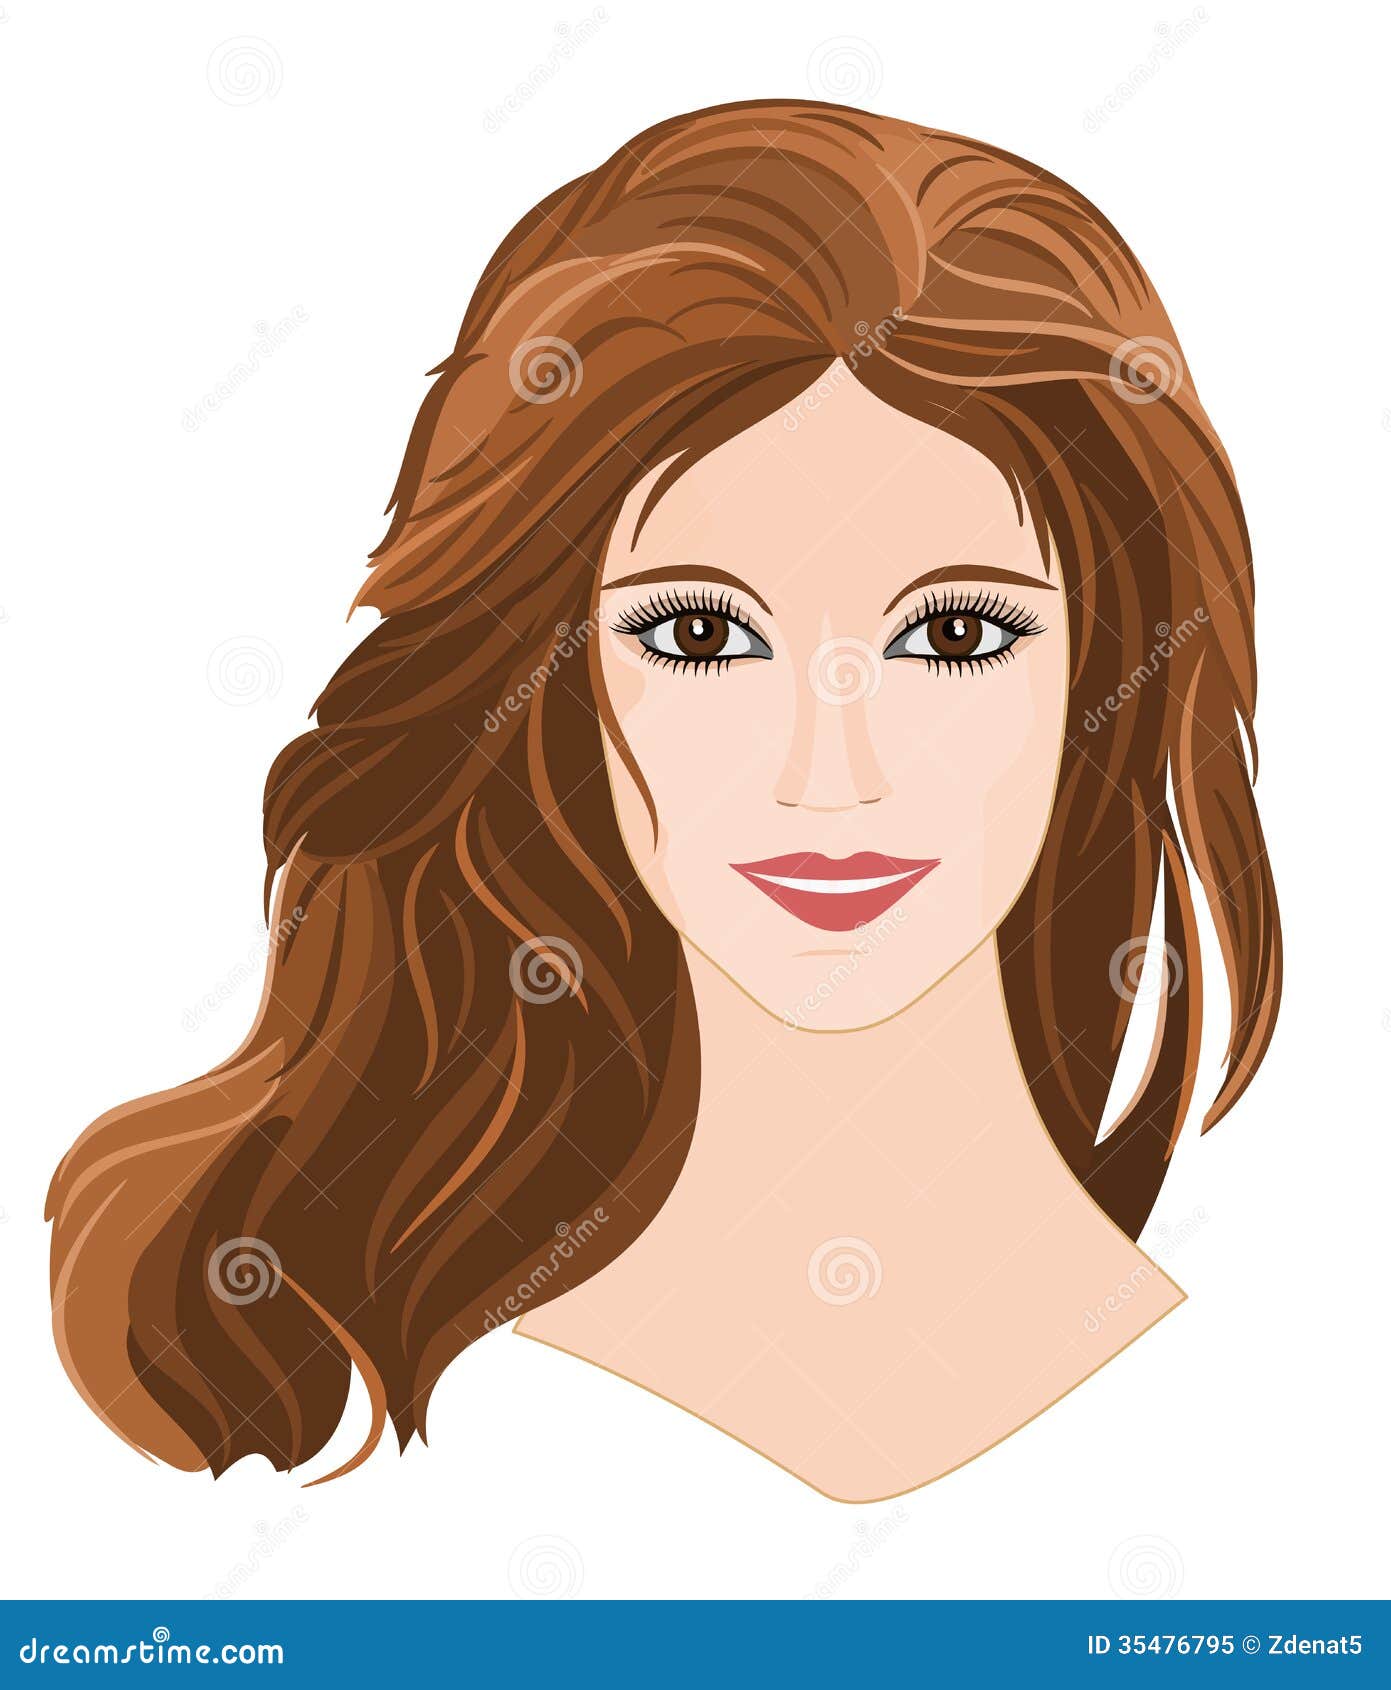 clipart girl with long hair - photo #37